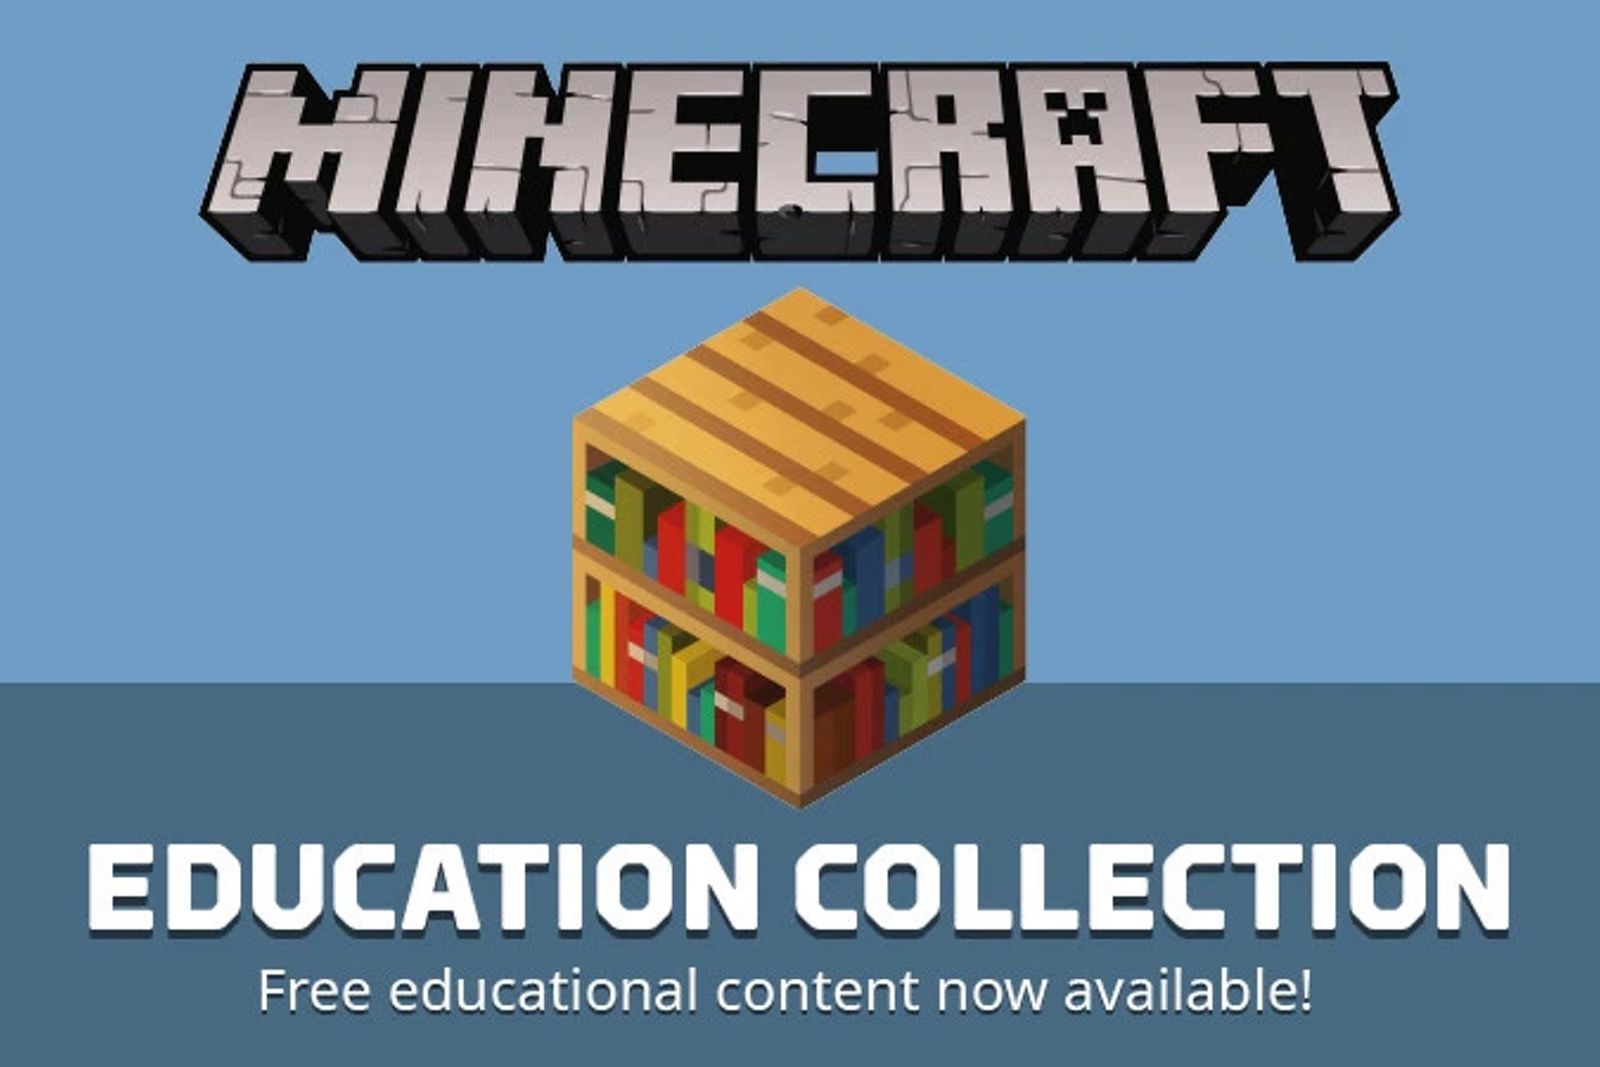 Xbox is bringing more educational content for young gamers and Minecrafts following suit image 1